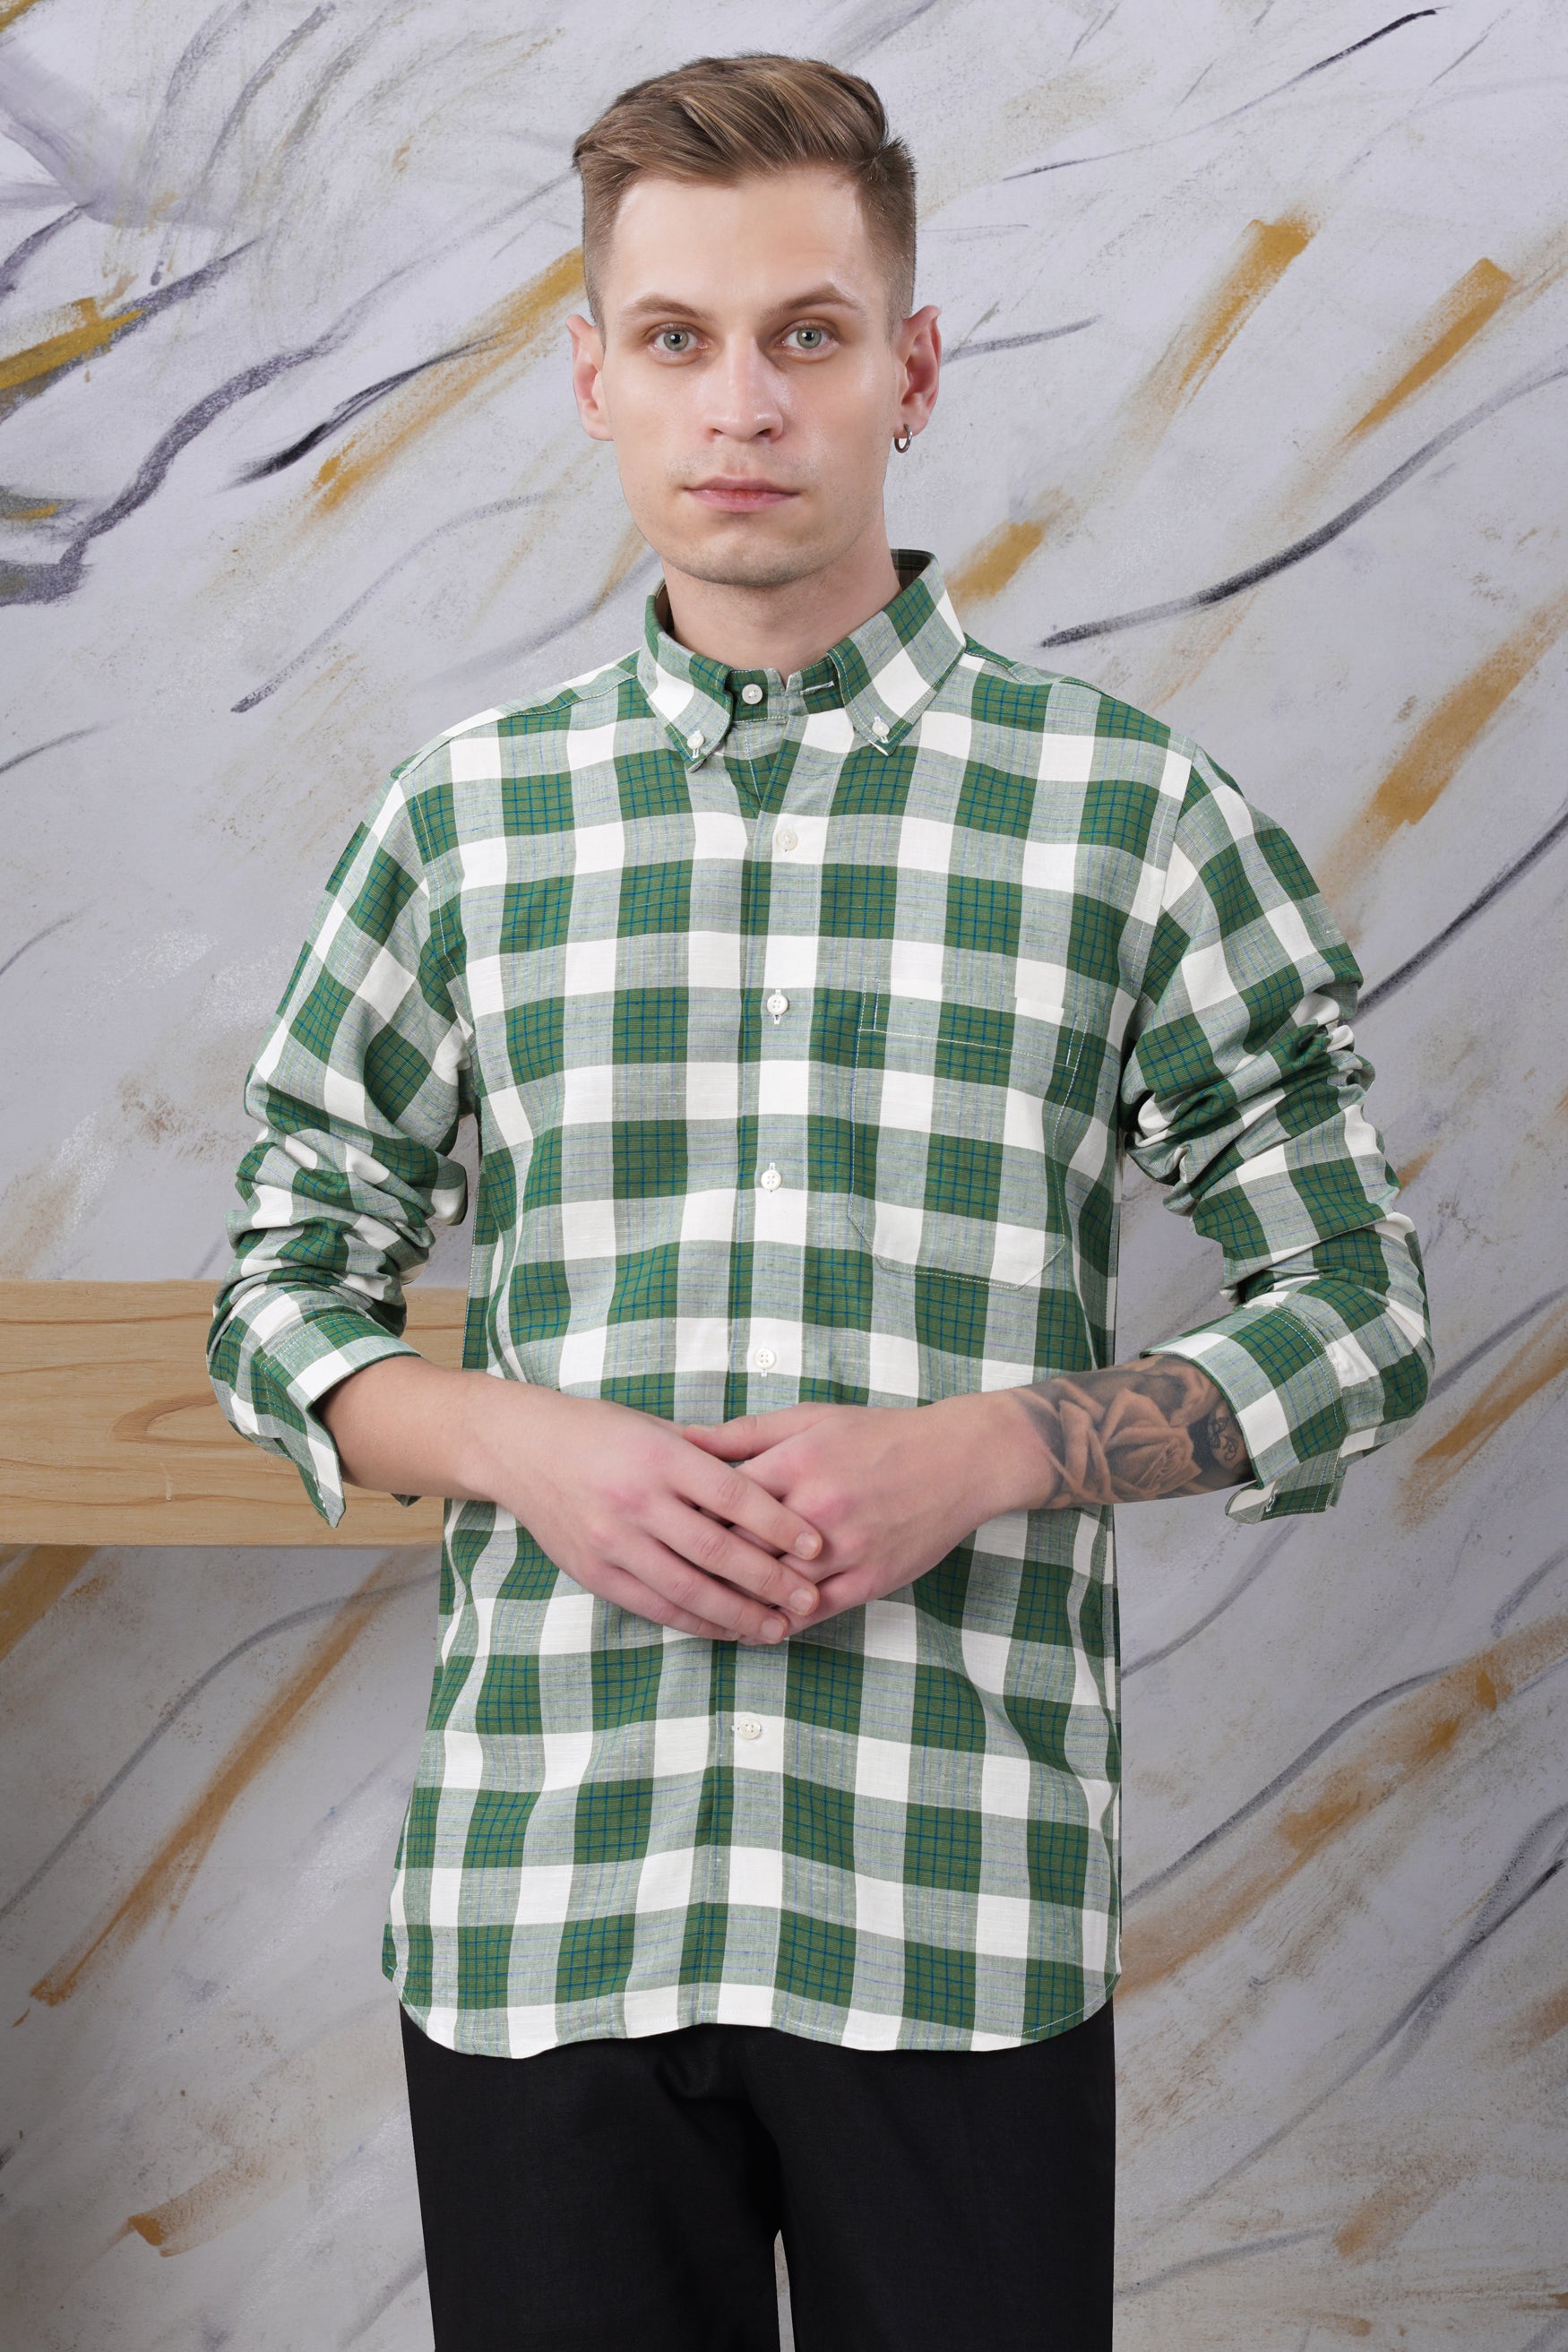 Pine Green and Pumice Gray Checkered Luxurious Linen Shirt 11684-BD-38, 11684-BD-H-38, 11684-BD-39, 11684-BD-H-39, 11684-BD-40, 11684-BD-H-40, 11684-BD-42, 11684-BD-H-42, 11684-BD-44, 11684-BD-H-44, 11684-BD-46, 11684-BD-H-46, 11684-BD-48, 11684-BD-H-48, 11684-BD-50, 11684-BD-H-50, 11684-BD-52, 11684-BD-H-52